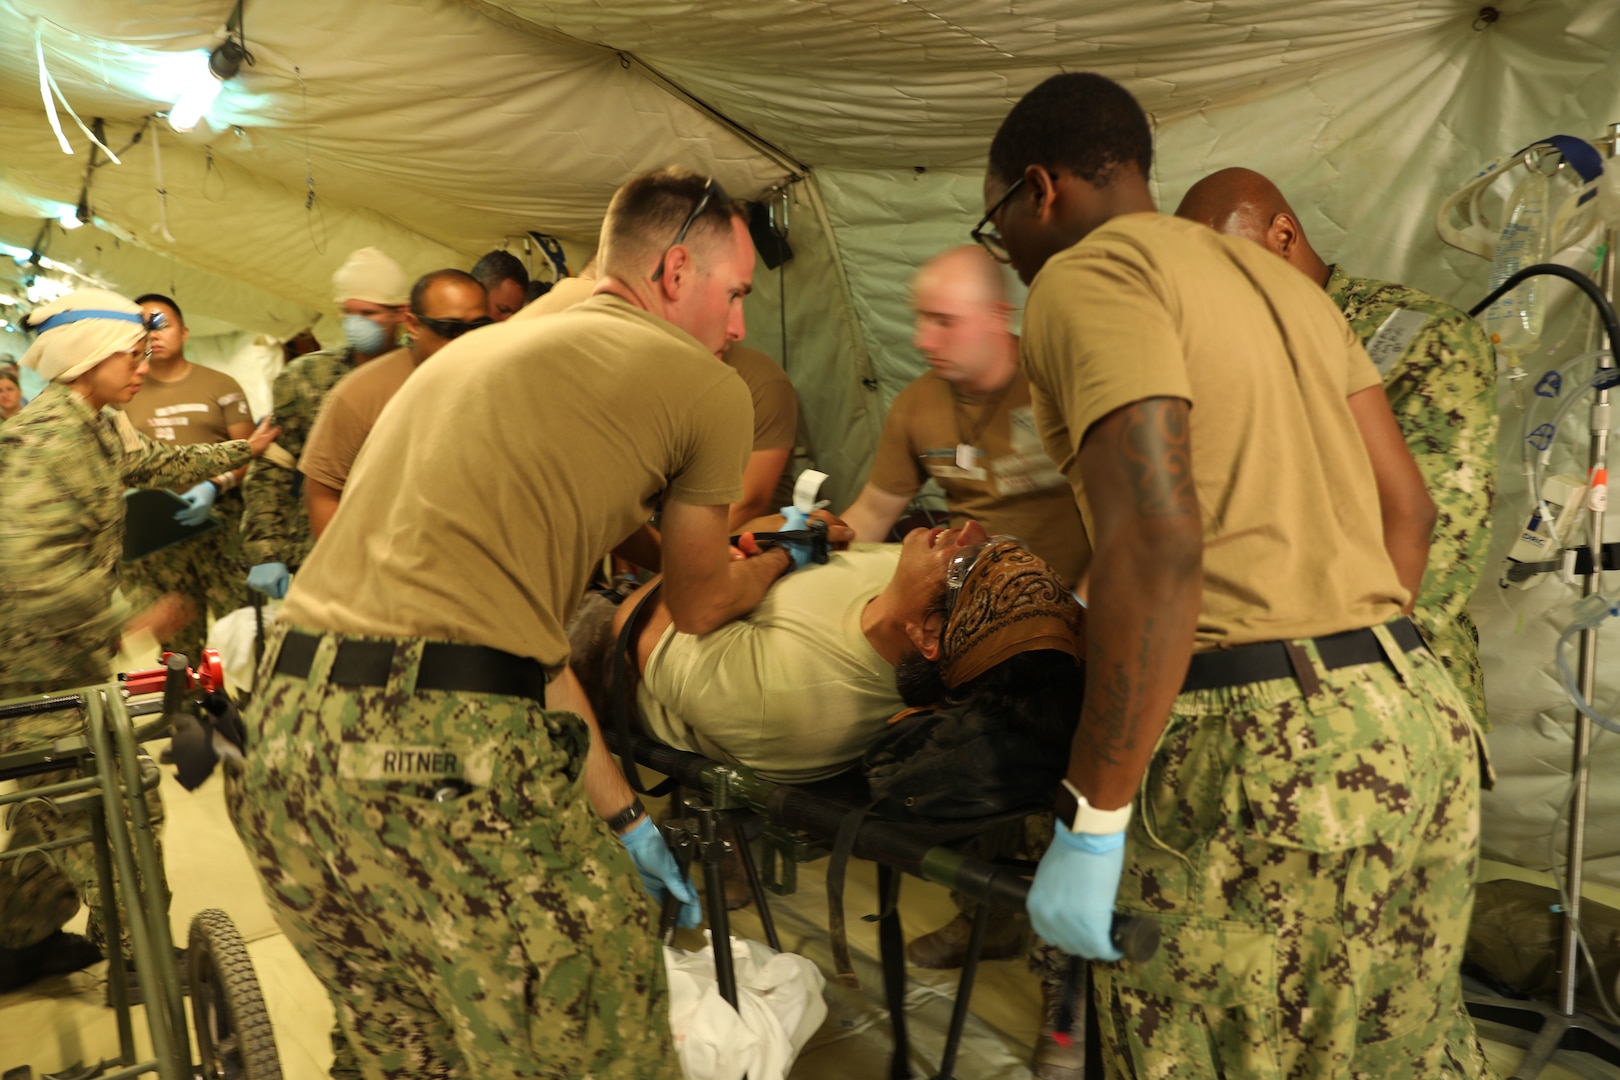 CAMP PENDLETON, Calif. (June 21, 2021) - Medical personnel assigned to Navy Expeditionary Medical Facility - M care for a simulated patient during a training exercise at Naval Expeditionary Medical Training Institute at Camp Pendleton, California.  The evolution evaluated the EMF’s patient processing and coordination across functional areas.  As a result, the EMF was certified with Tier 1 capability, with the ability to deploy and provide combat operations medical support to U.S. Fleet Forces.  (U.S. Navy photo by Hospital Corpsman 1st Class Nesinee Weber, Naval Expeditionary Medical Training Institute/ Released).